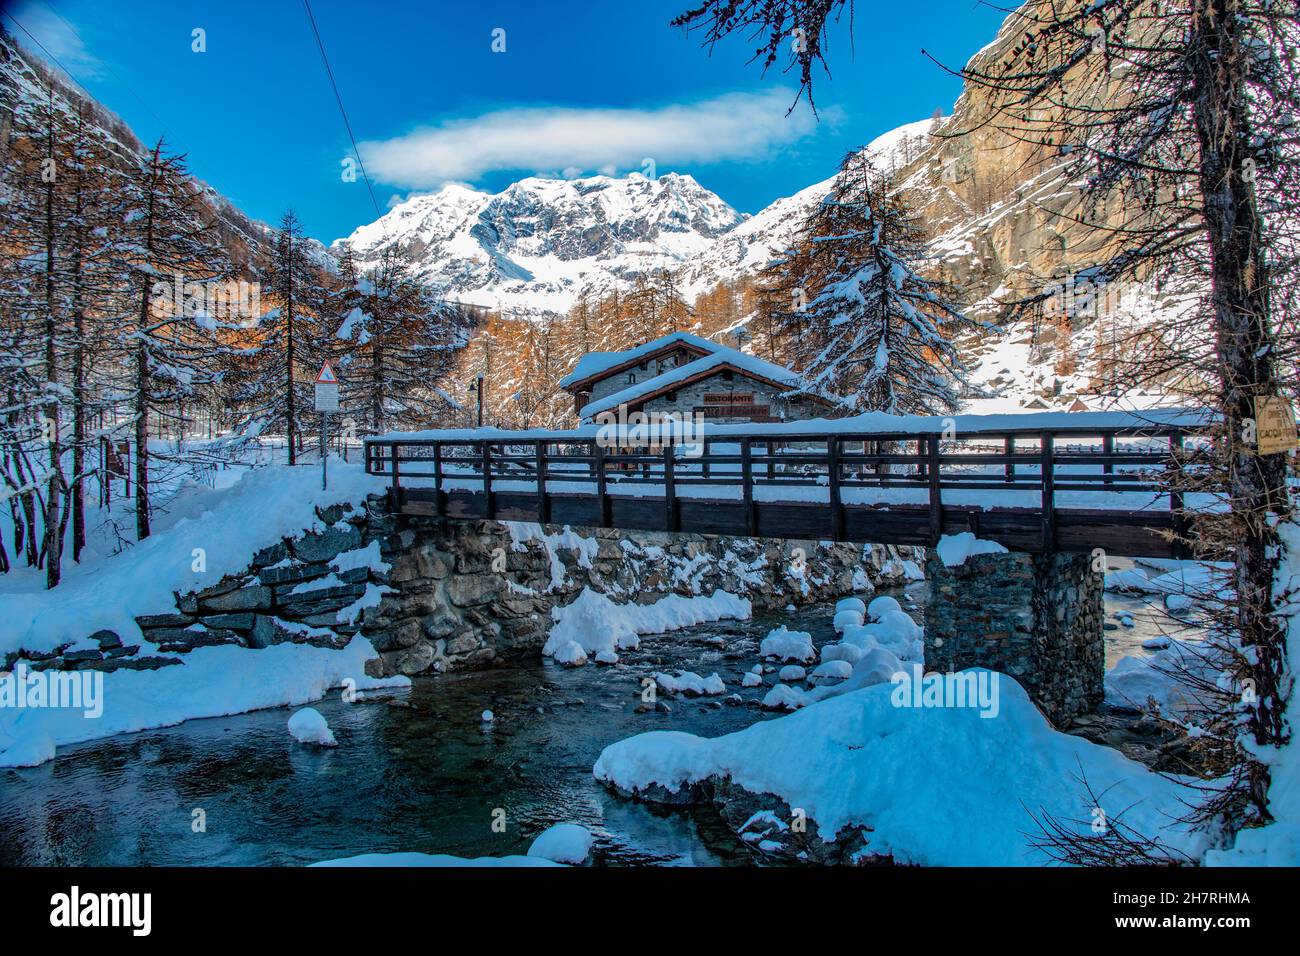 Ceresole Reale, Gran Paradiso National Park, typical chalet and snowy scene, Piedmonte, Italy Stock Photo